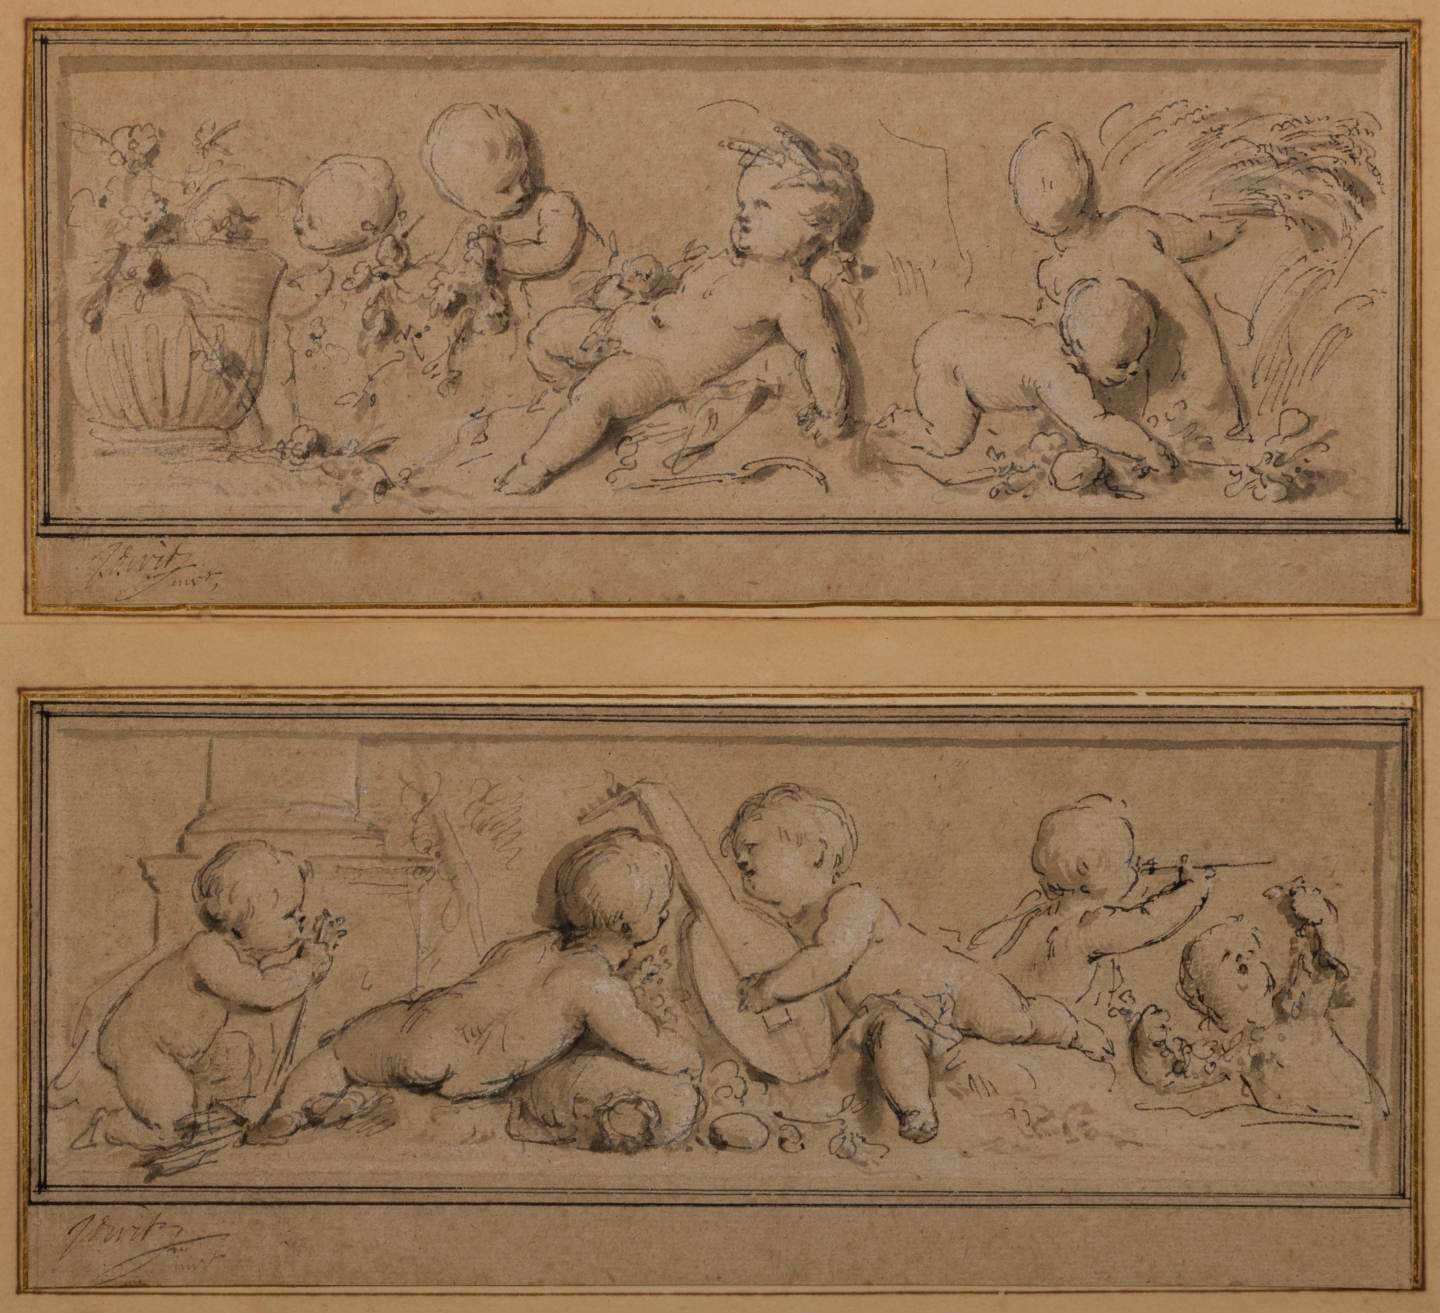 Jacob de Wit (Amsterdam, 1695-1754) Allegory of spring and summer and allegory of the five senses (Two designs for the countryhouse of Jan Hüdde Dedel (Amsterdam, 1702-The Hague, 1777), mayor of The Hague)